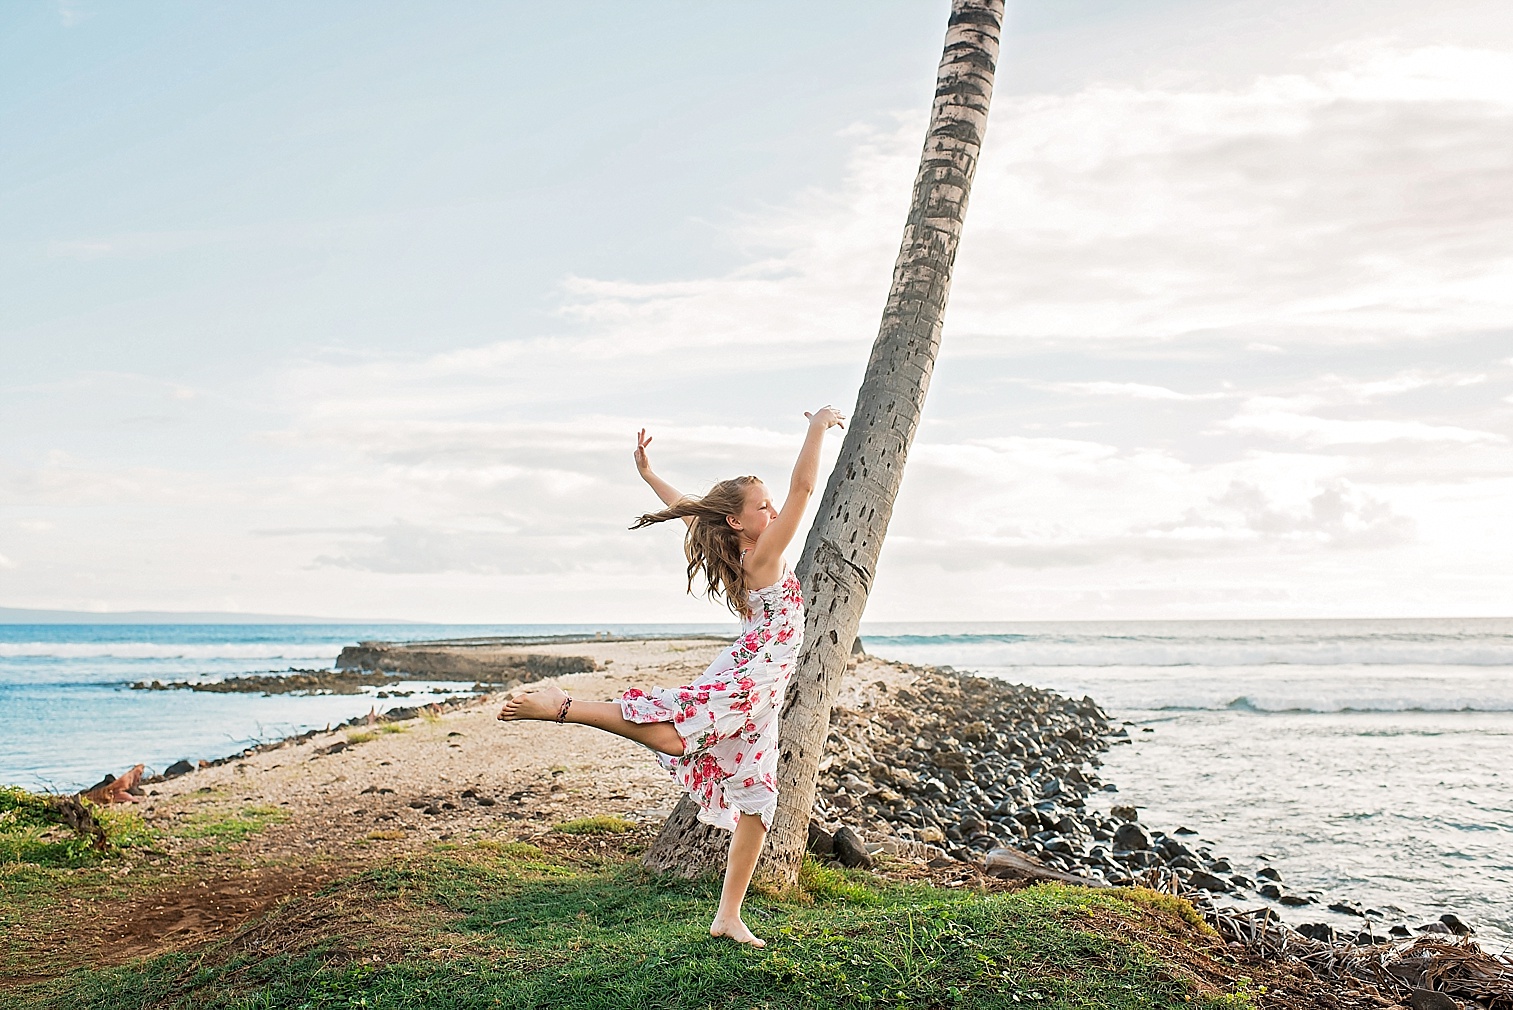 Dancing at the beach in Maui